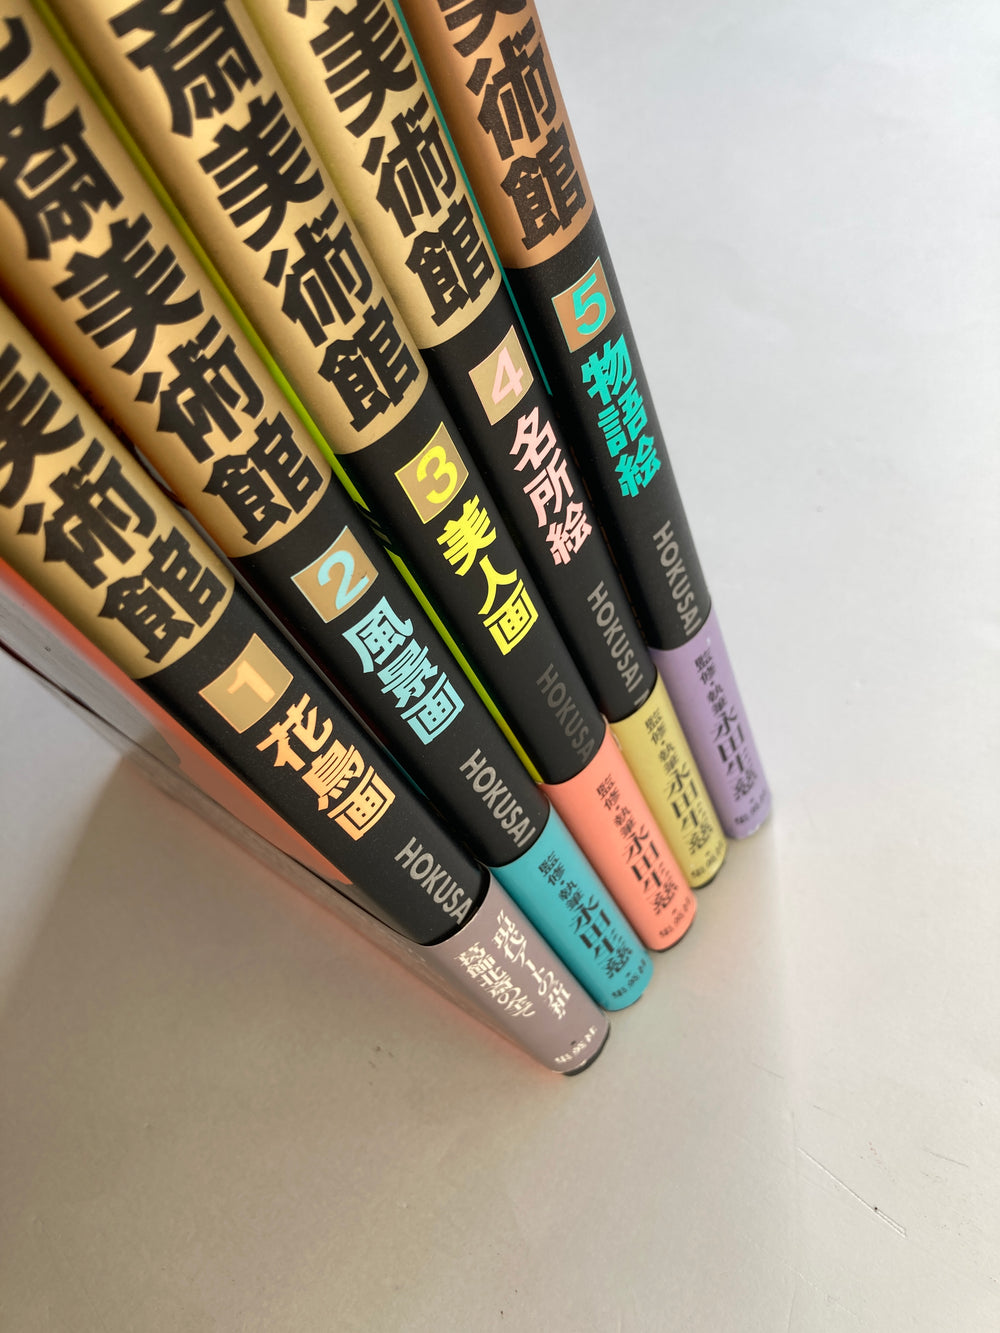 SET / HOKUSAI MUSEUM  - Complete collection - 5 Books